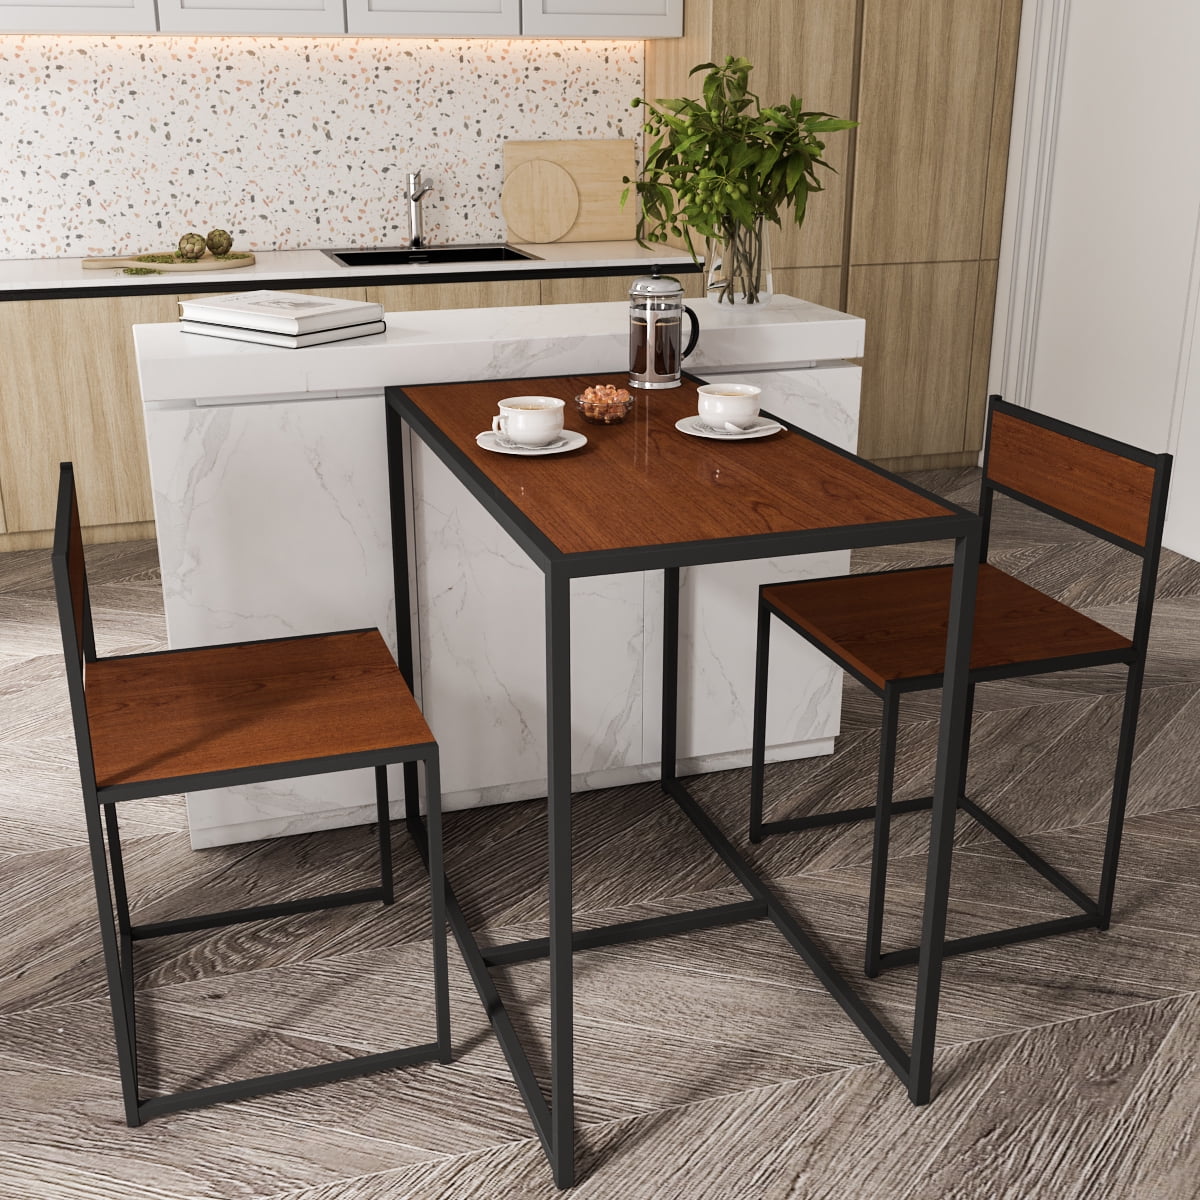 HOMYCASA Compact 3 Piece Set Kitchen Dining Table and Chairs Set of 2 with Storage Shelf Space Saving for Small Spaces 